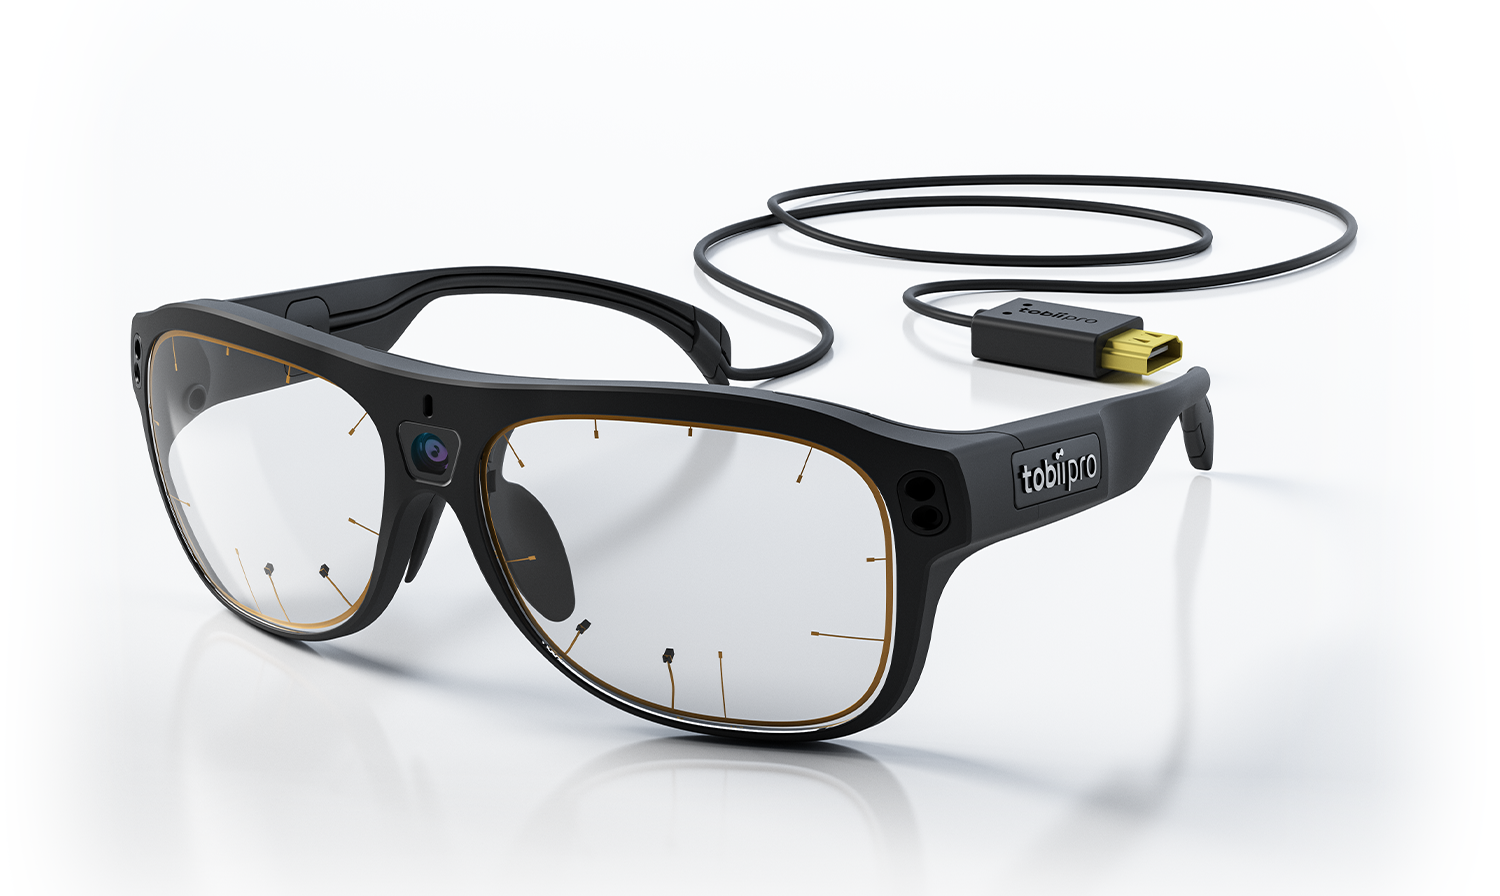 Tobii Pro Glasses 3 side view